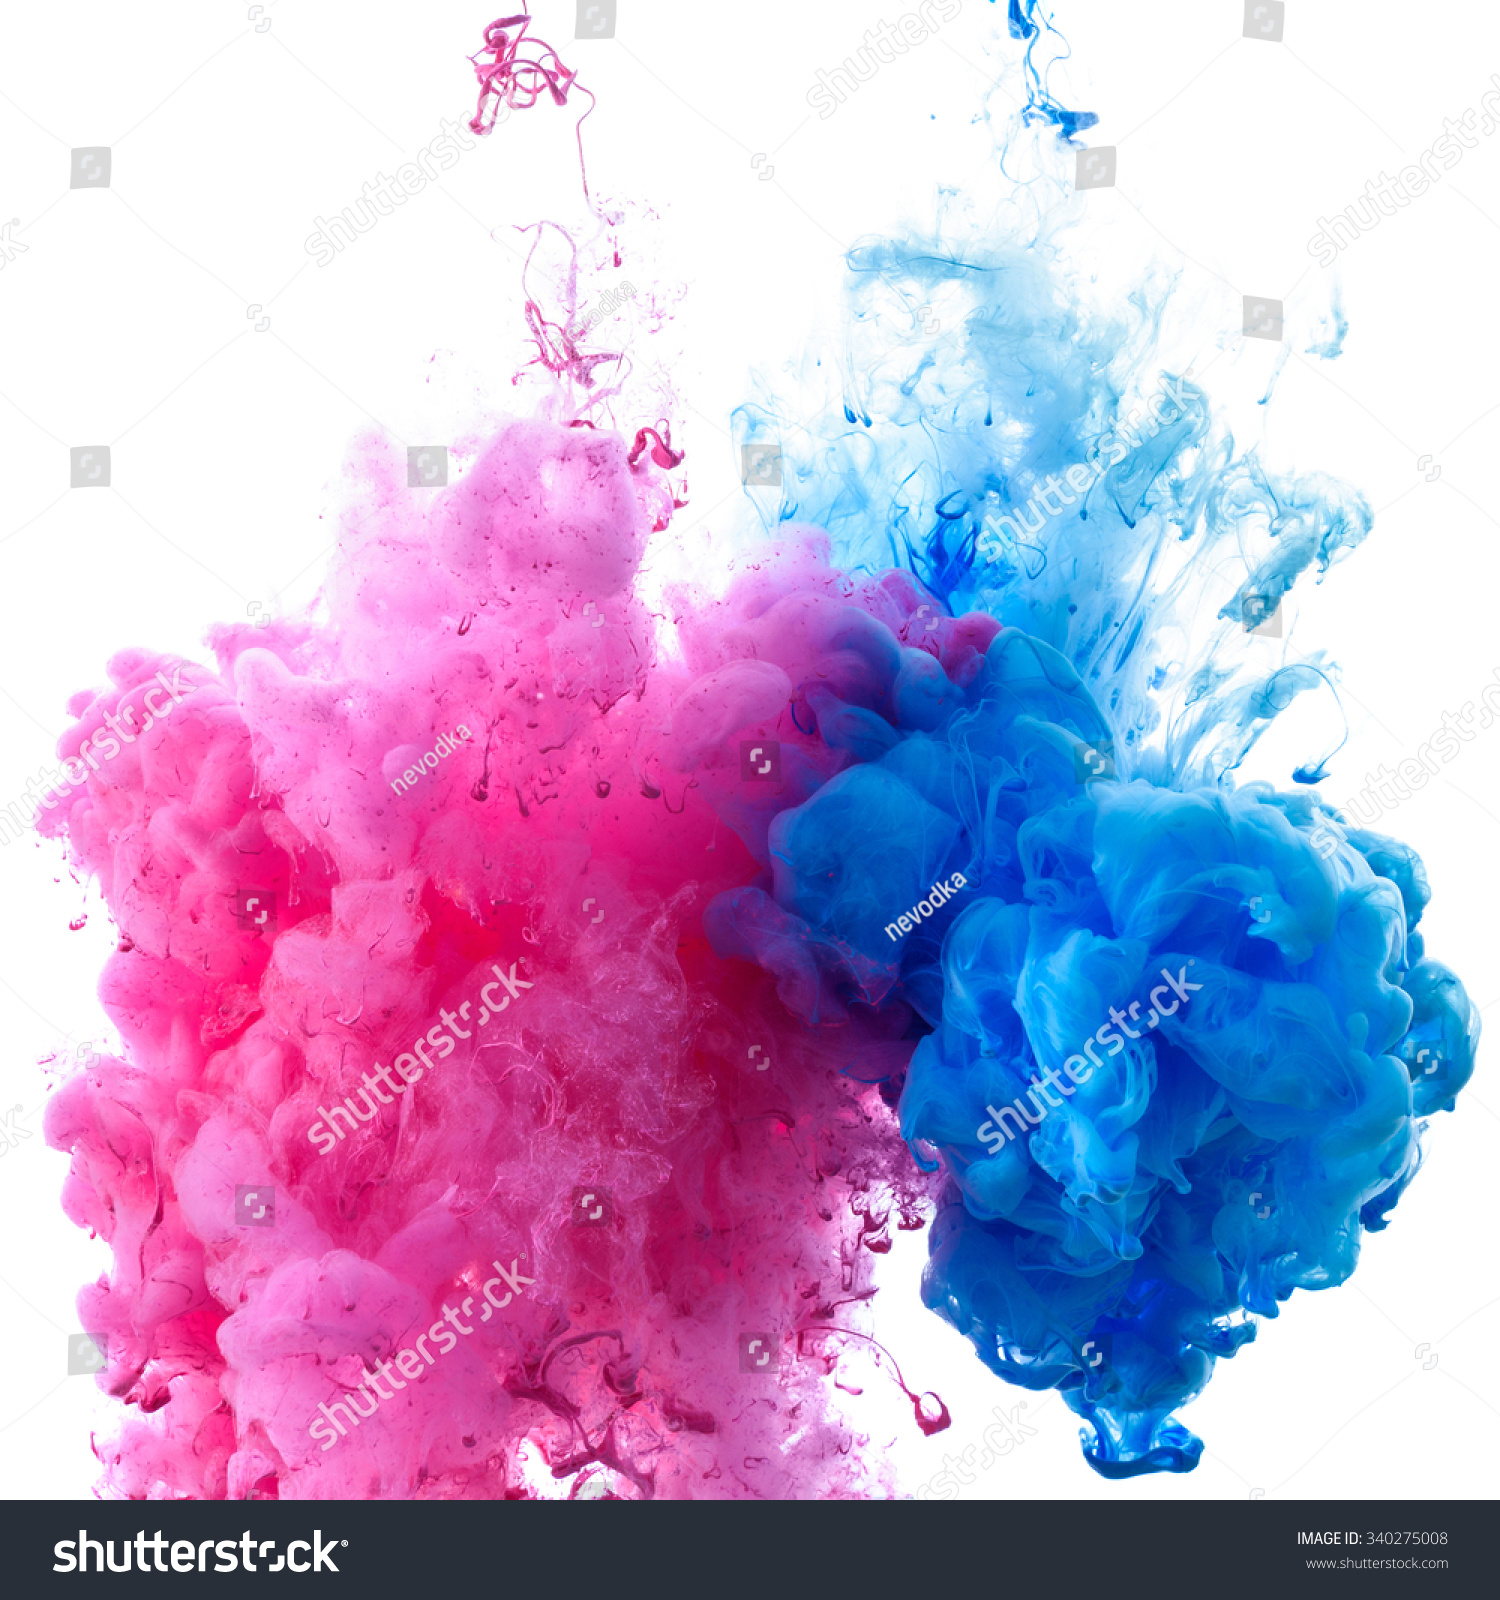 Pink And Blue Clouds Of Paint In Water Close-Up Stock Photo 340275008 ...